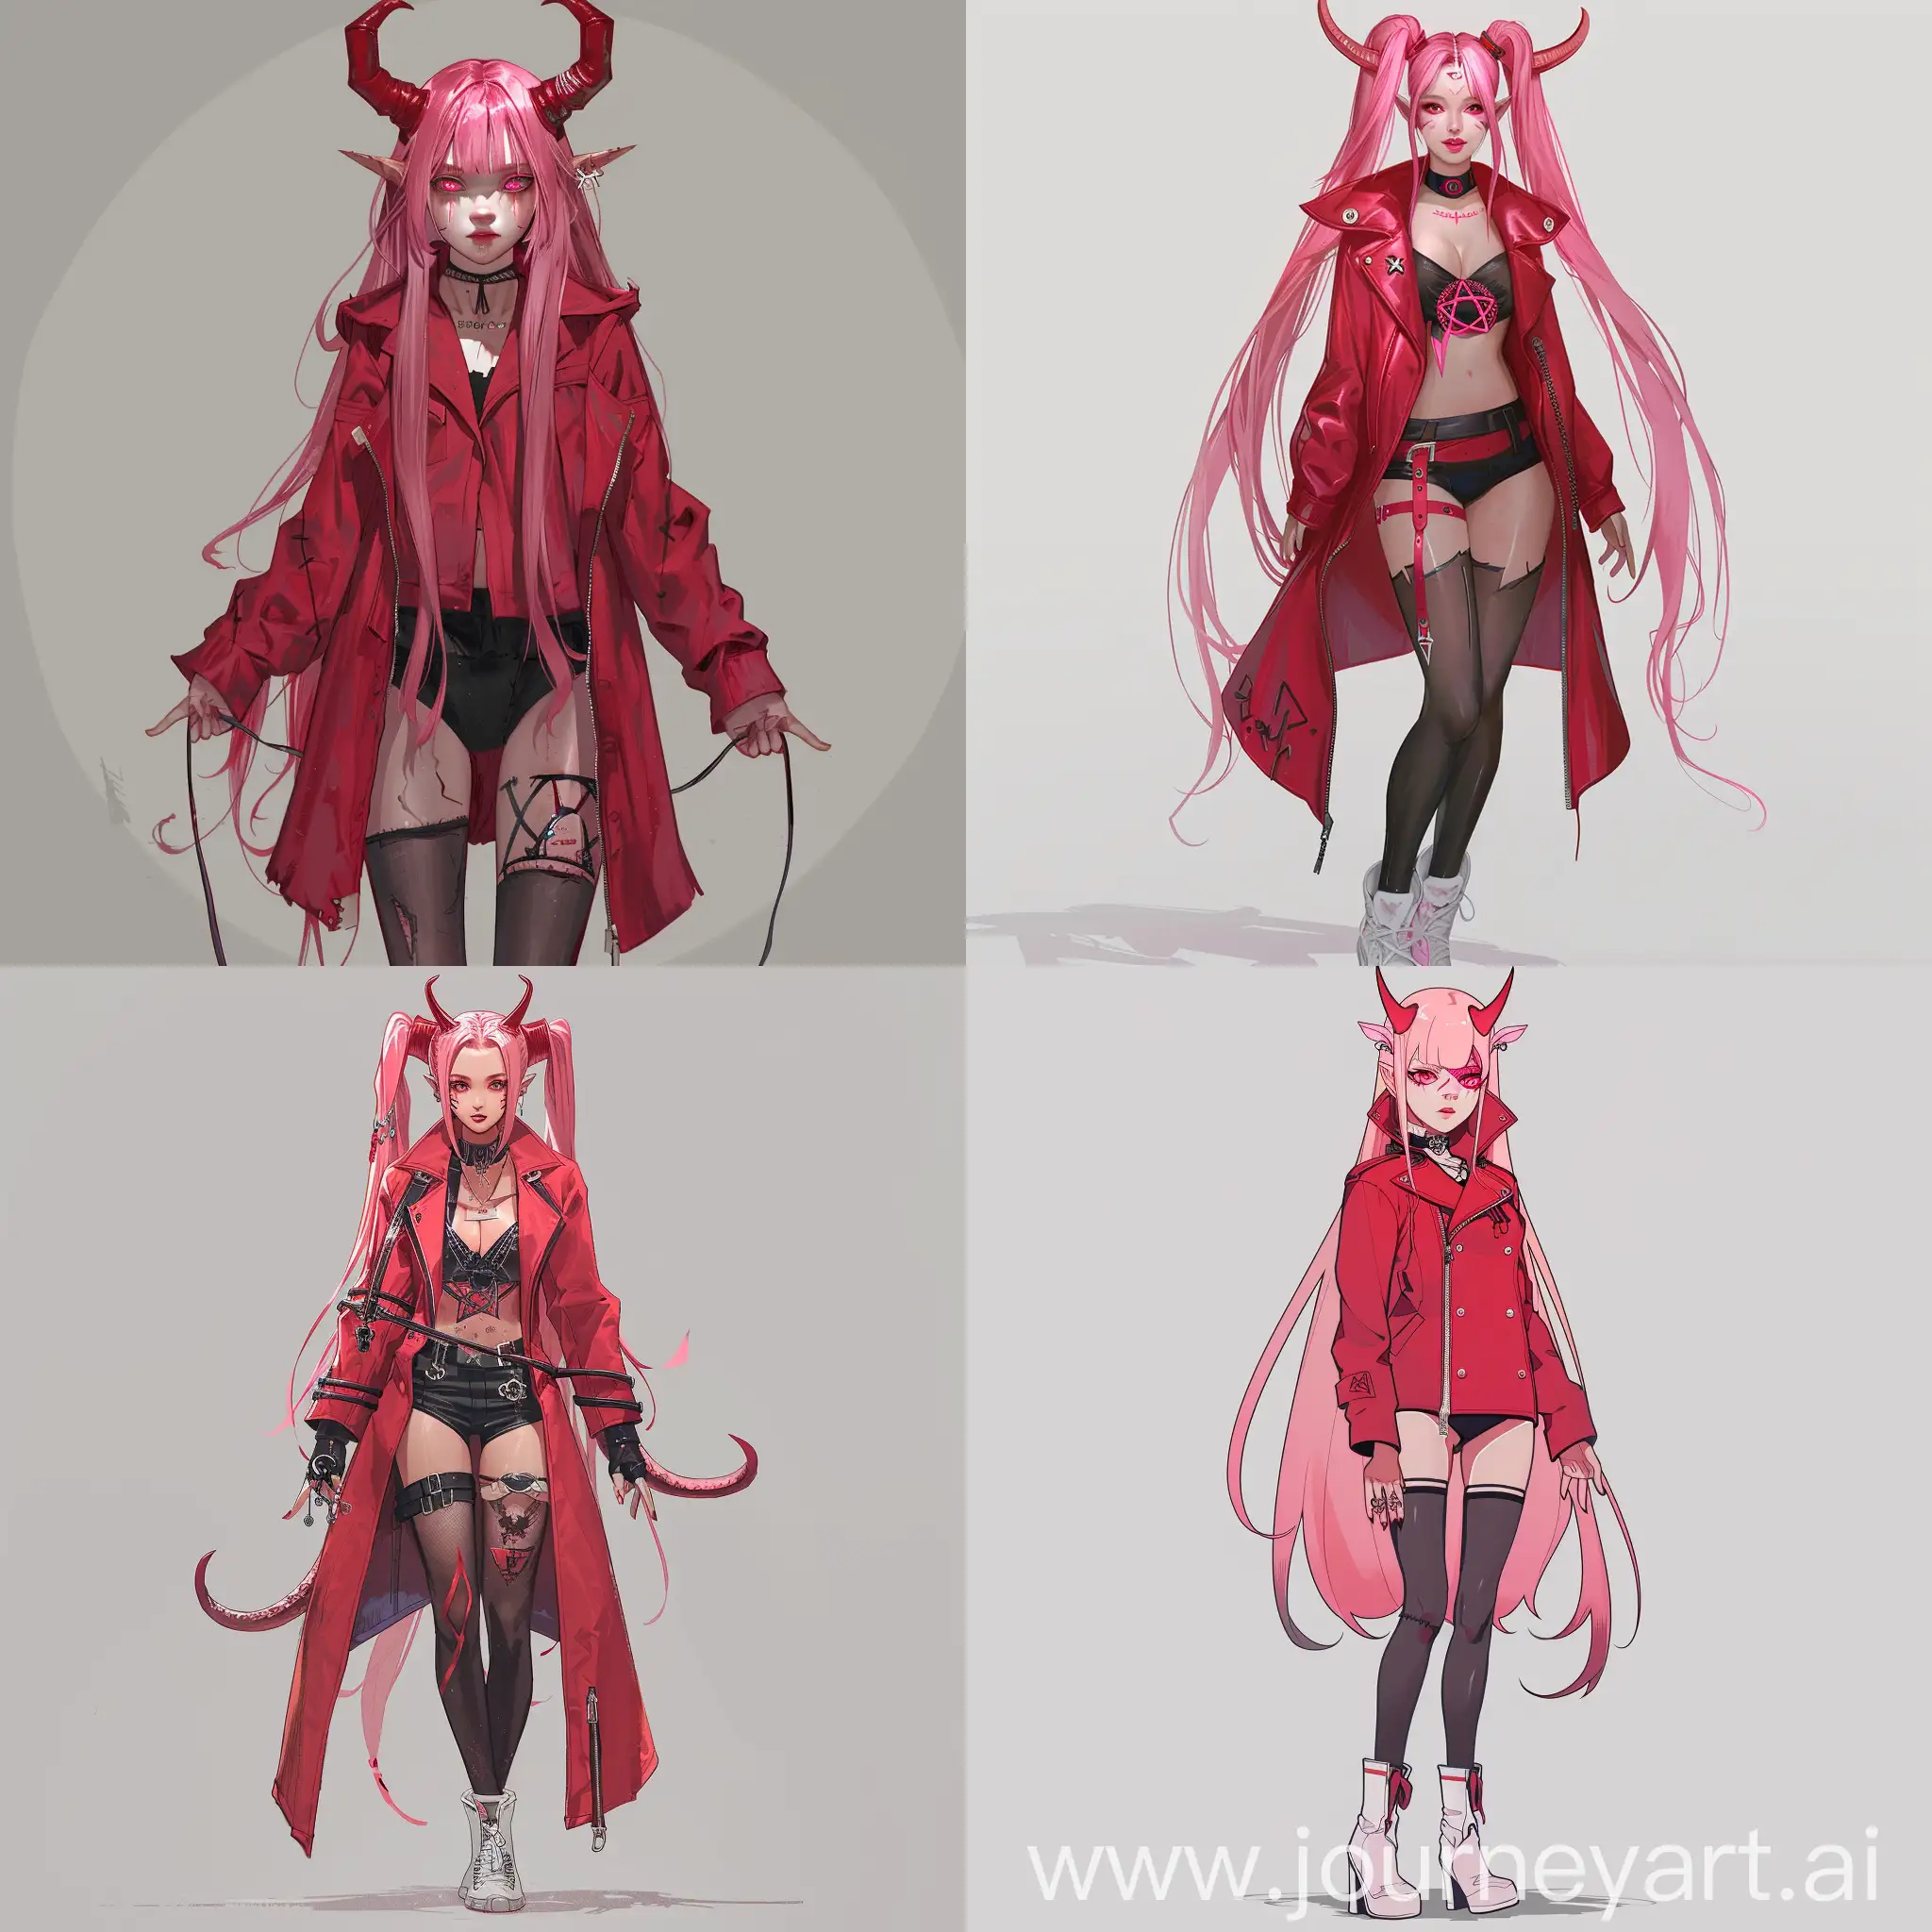 Athletic-PinkHaired-Demoness-in-Red-Coat-and-Pentagram-Tattoo